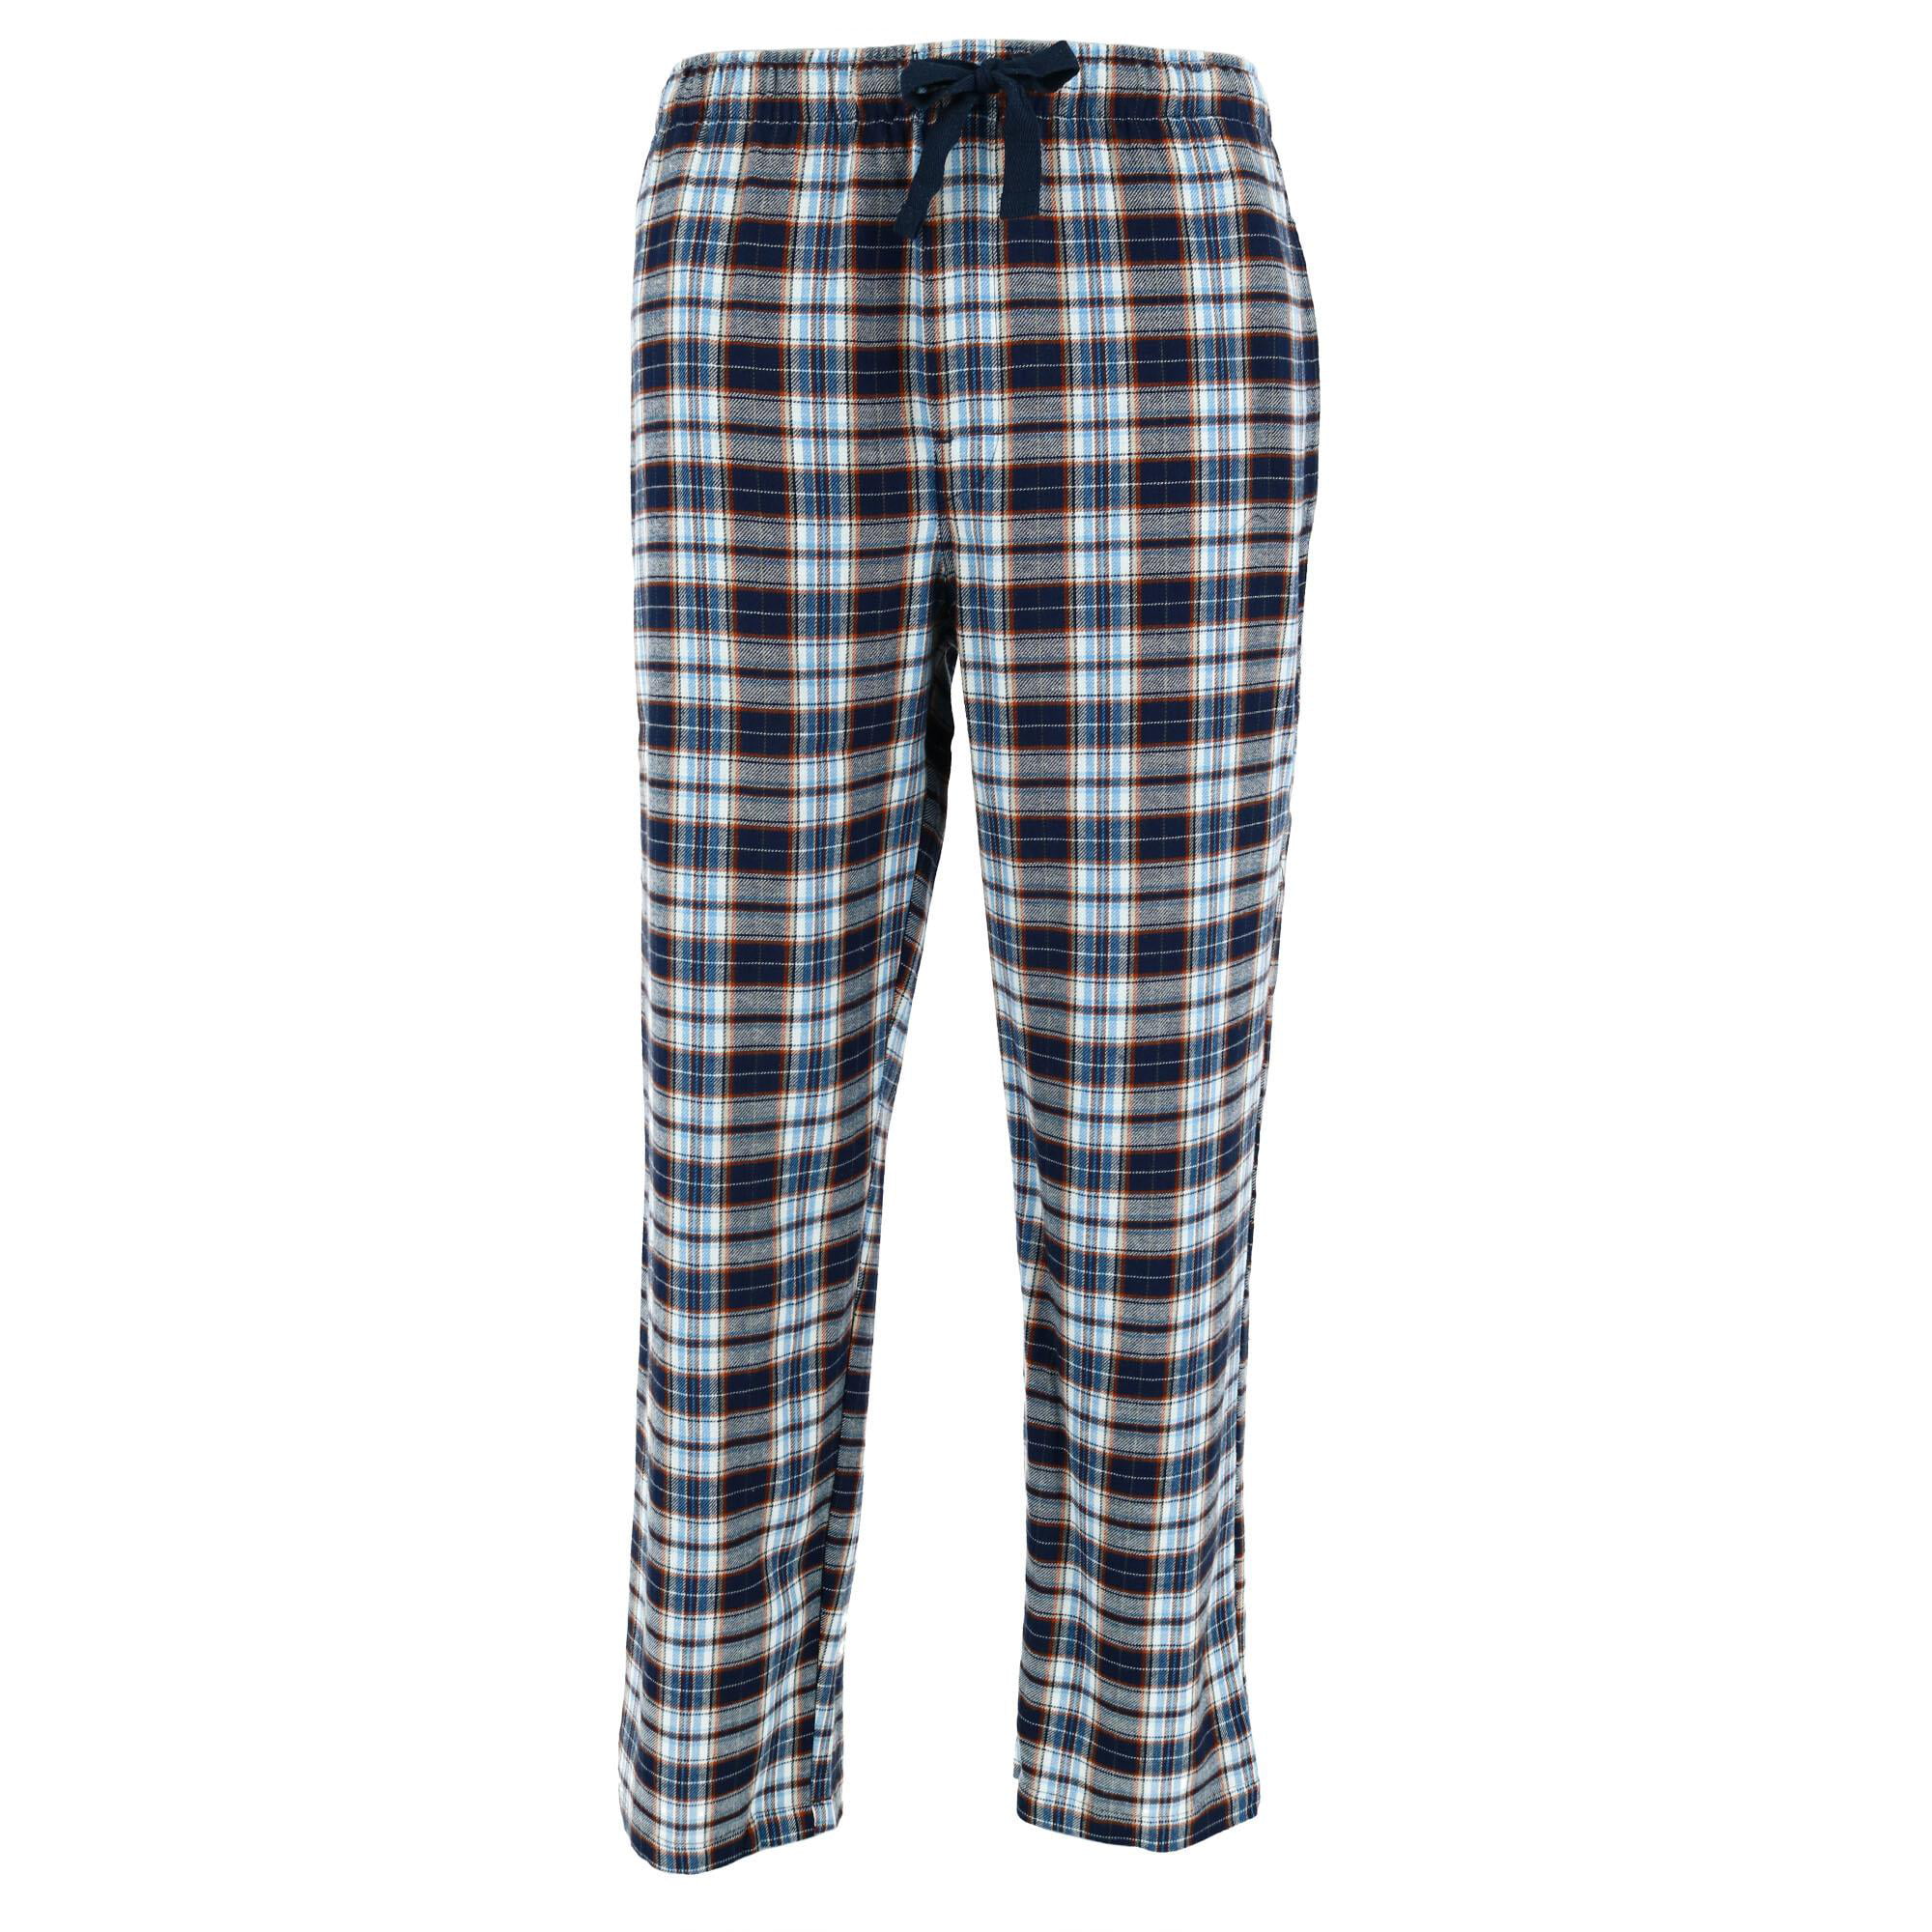 Pajama Bottoms Clothing & Accessories Geoffrey Beene Mens Jersey Knit ...